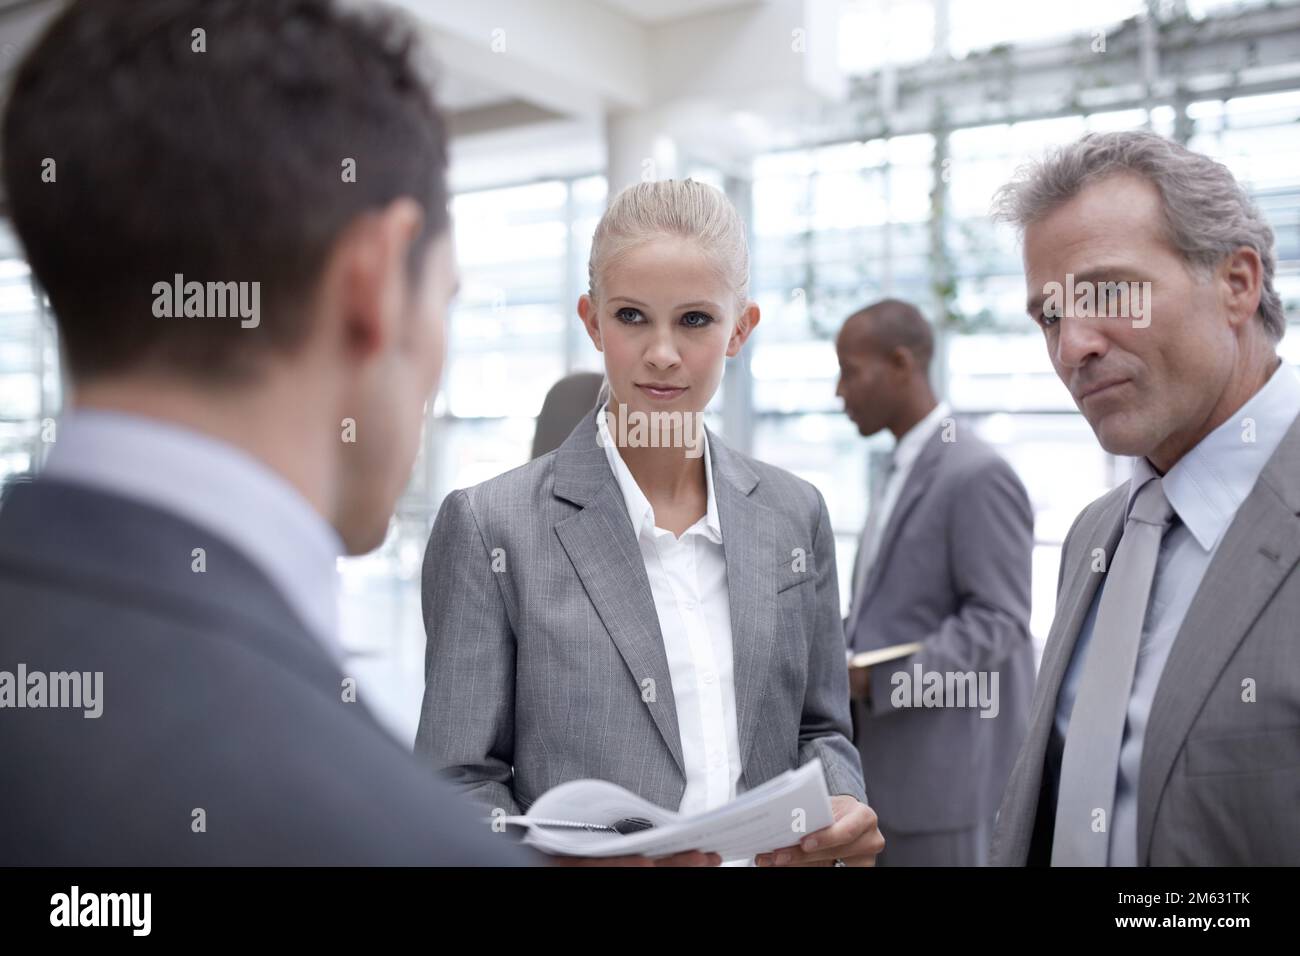 Making his point clear. A diverse group of serious-looking businesspeople looking over reports together. Stock Photo